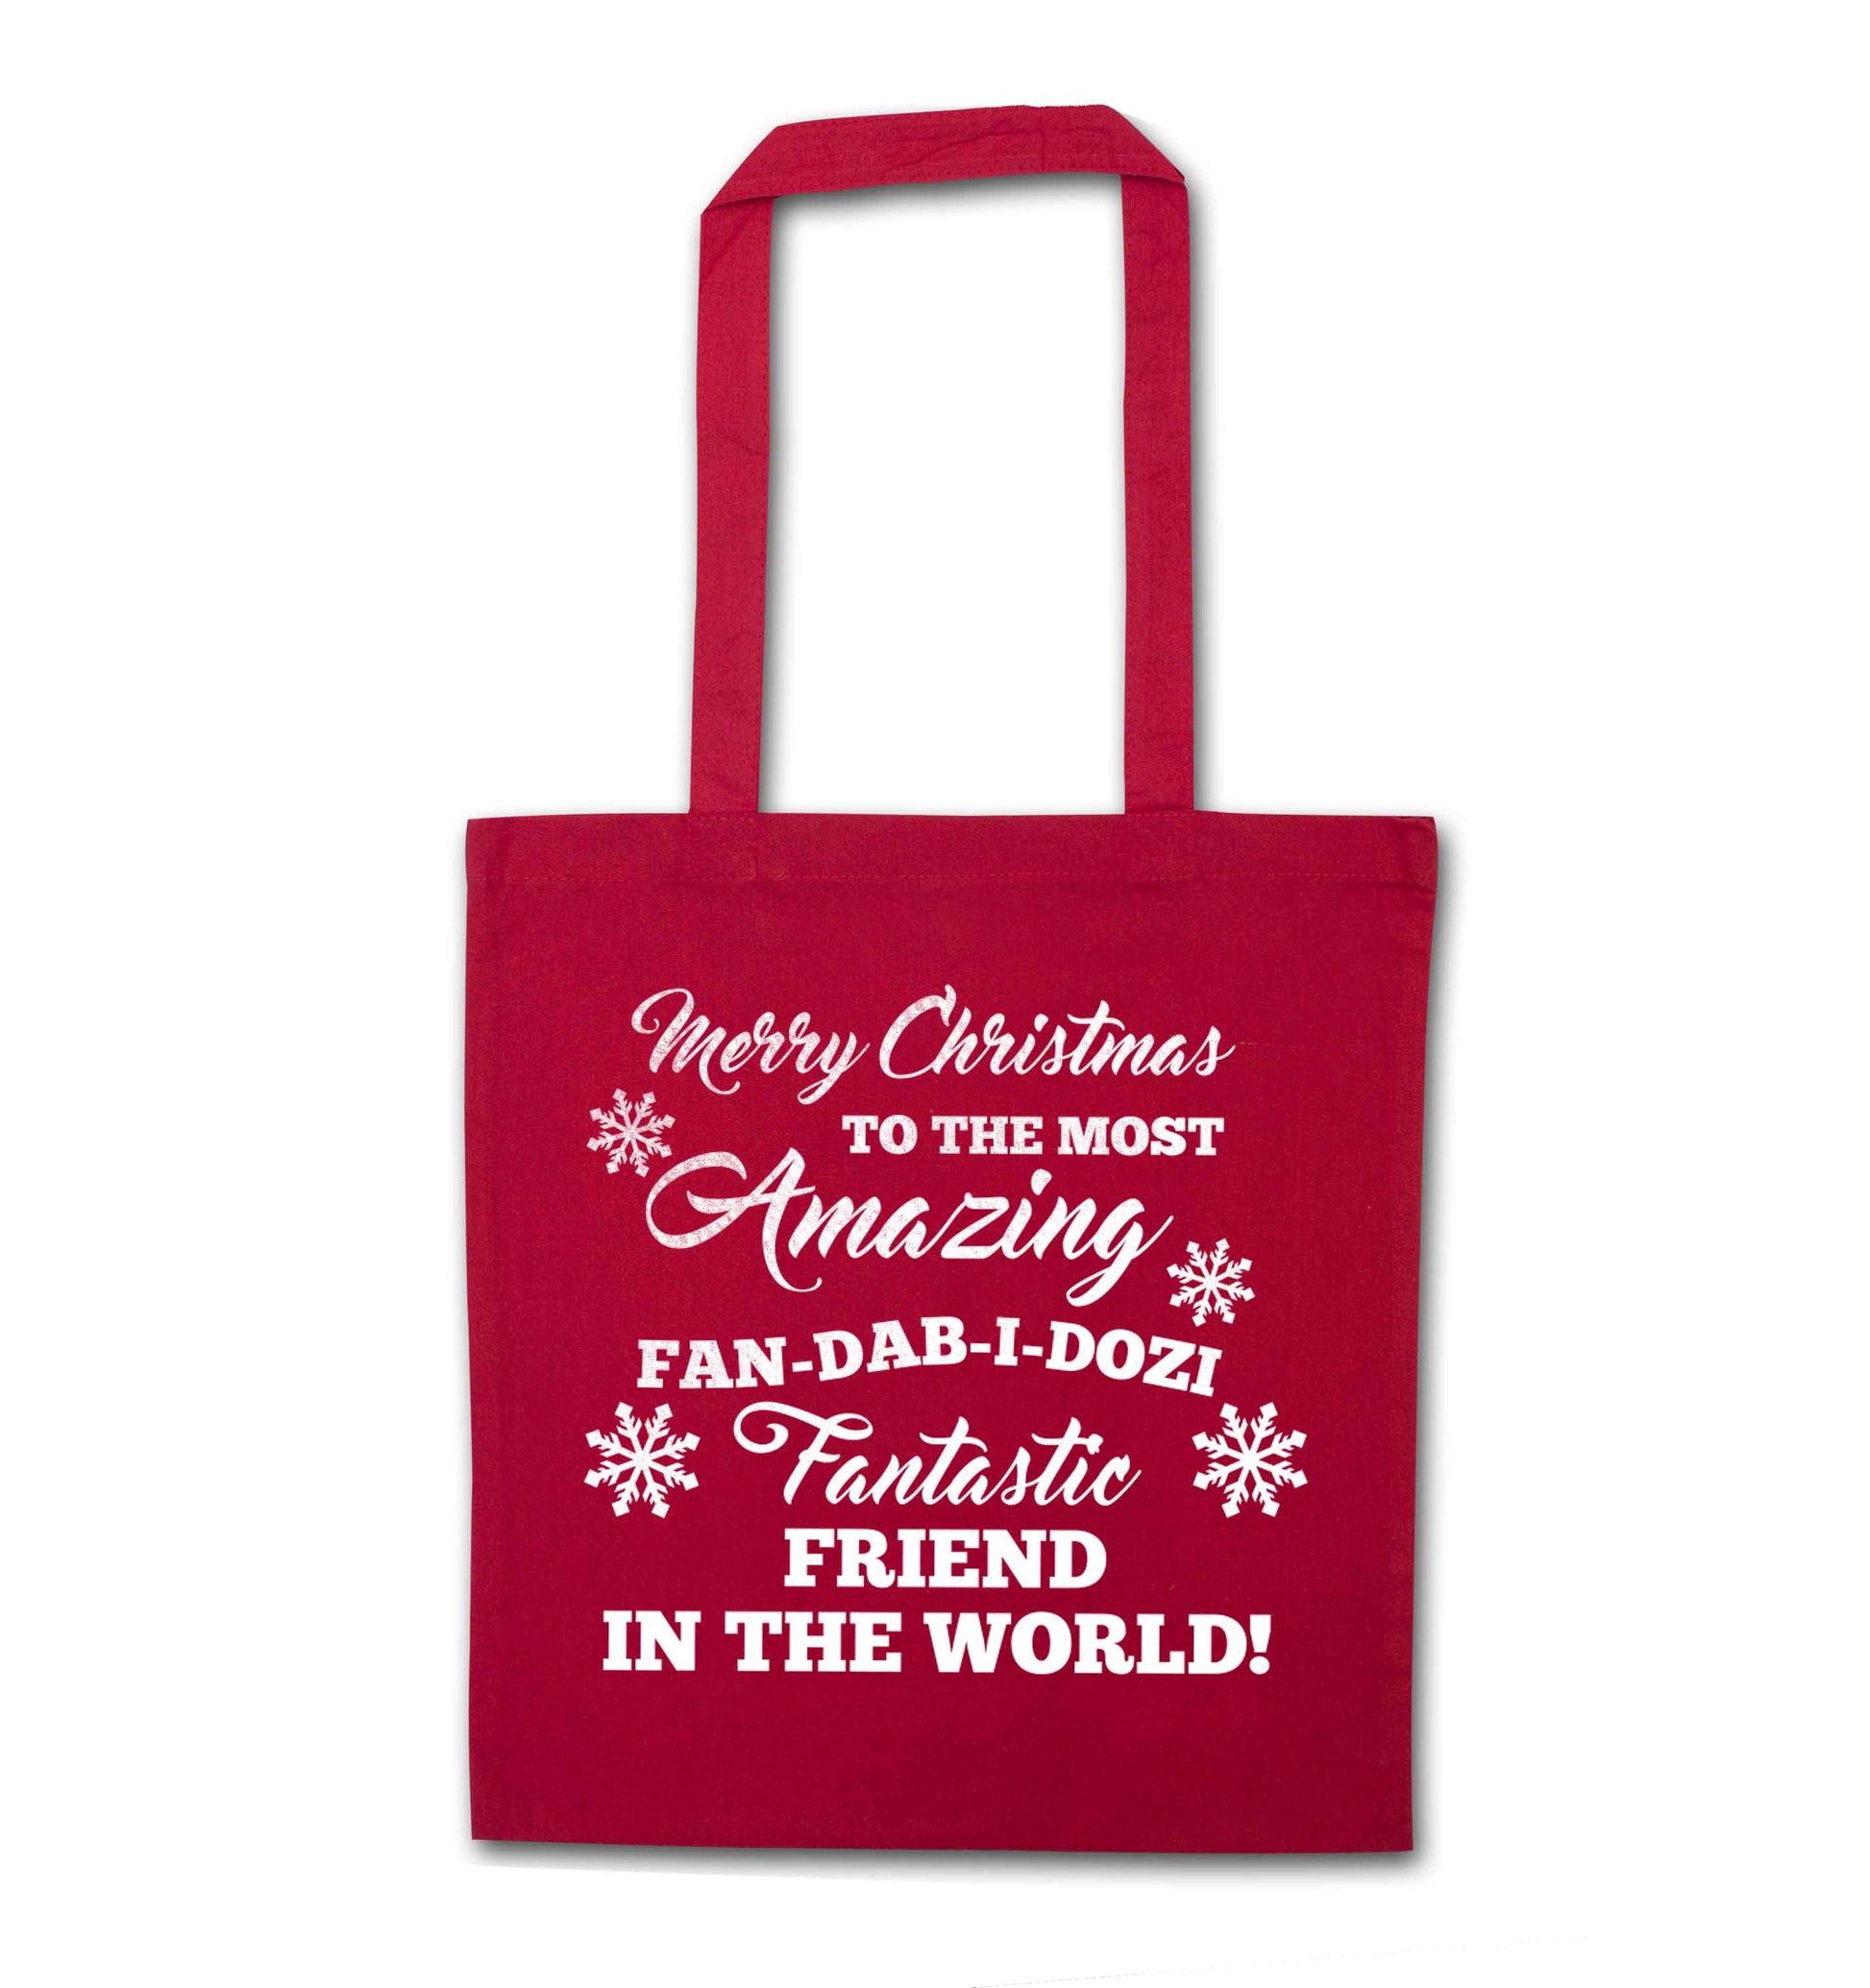 Merry Christmas to the most amazing fan-dab-i-dozi fantasic friend in the world red tote bag